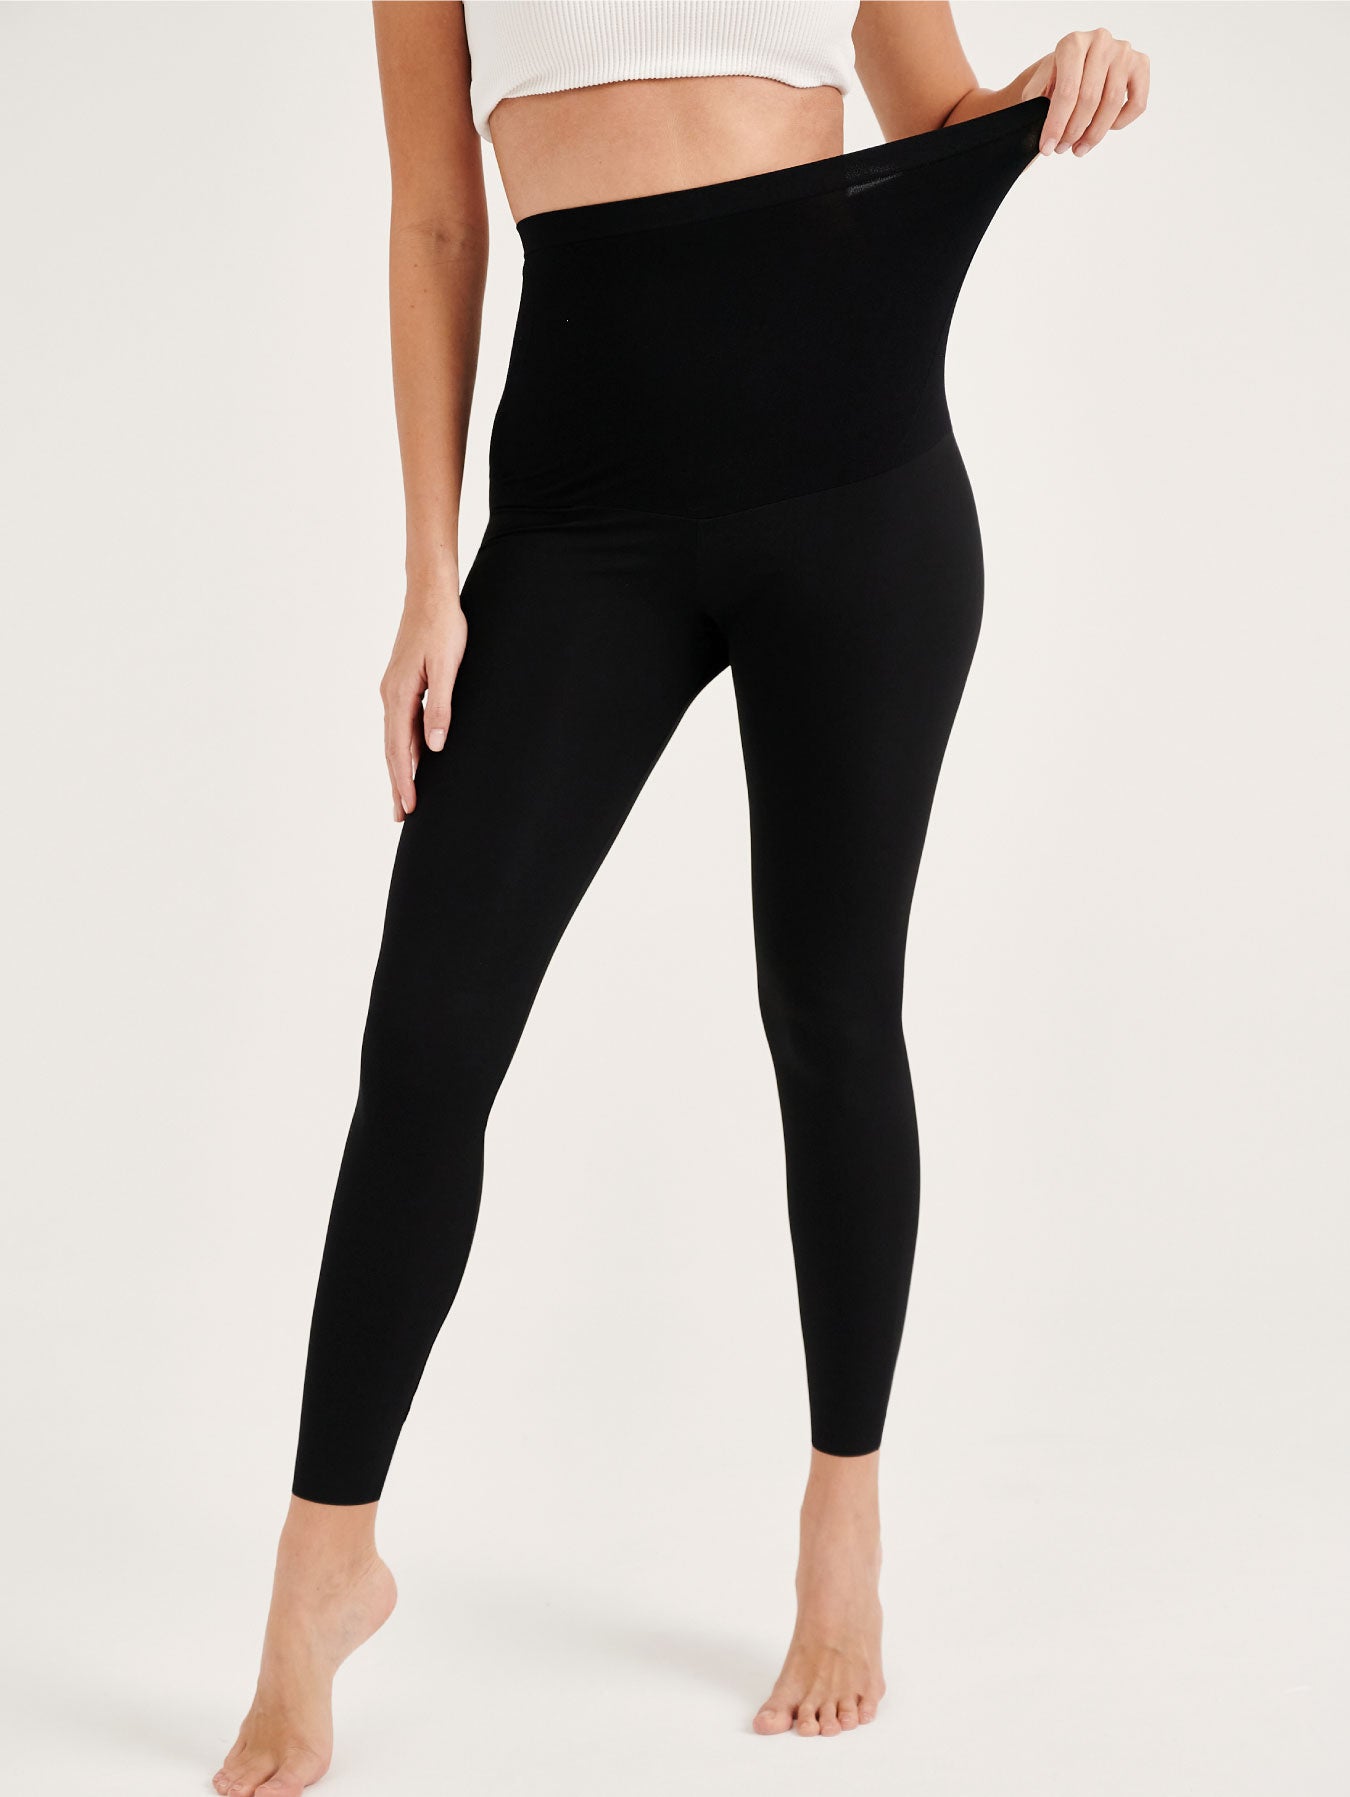 Maternity shaper leggings for a smooth silhouette